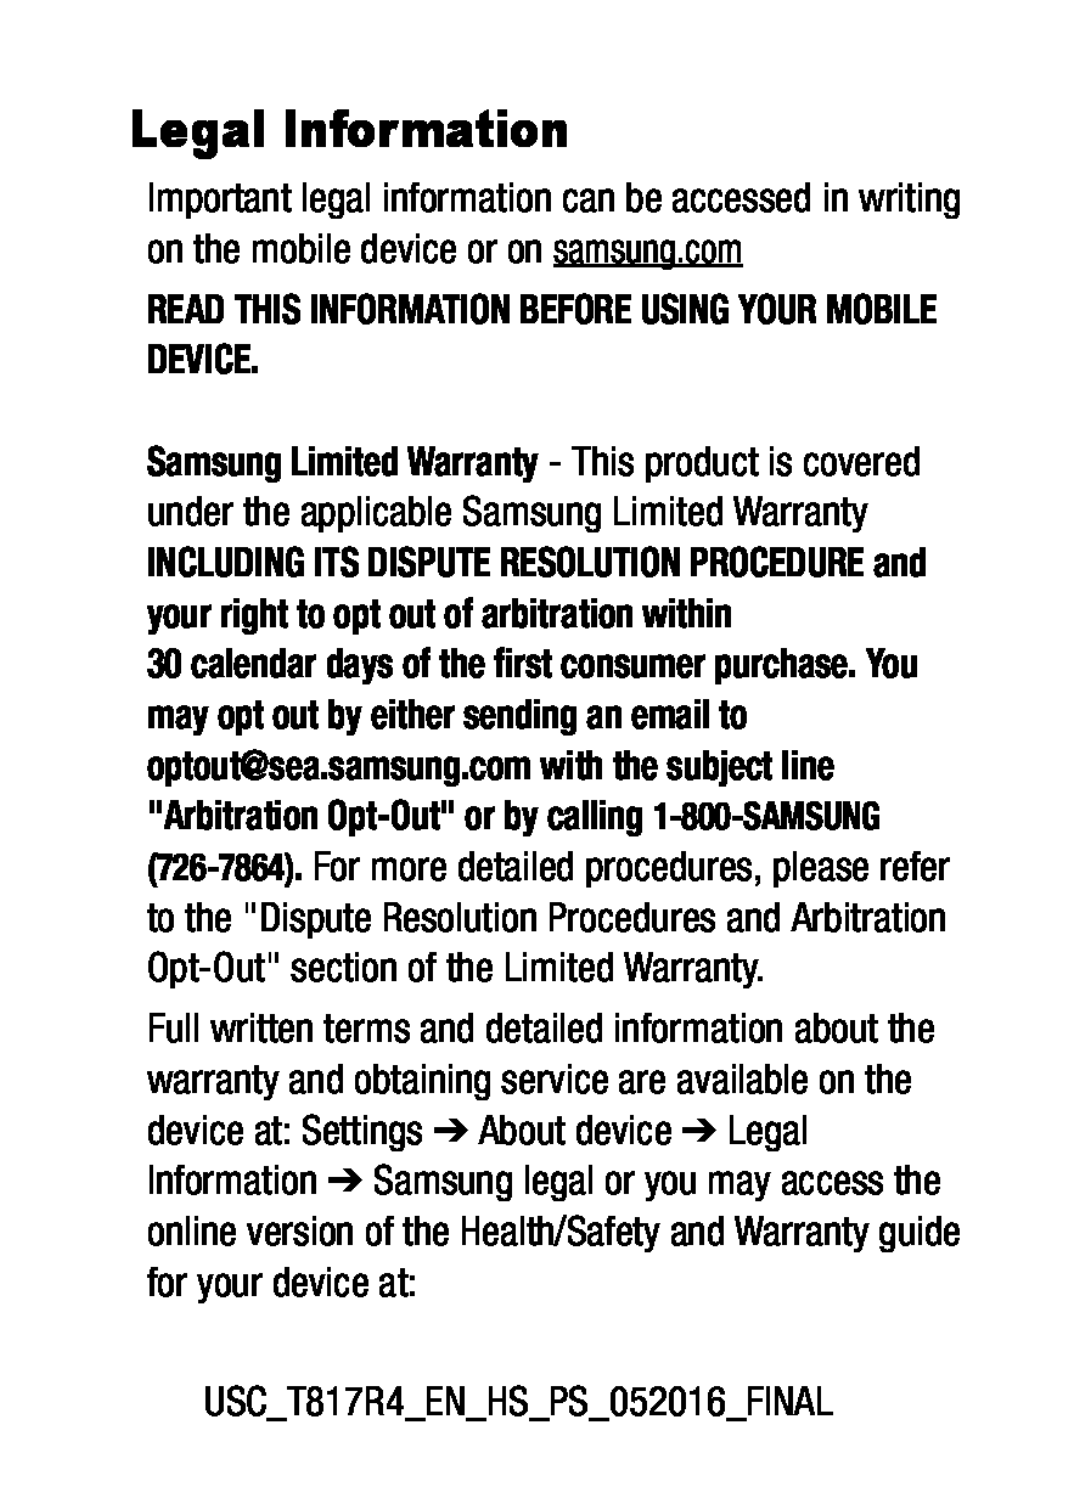 Samsung Limited Warranty - This product is covered Galaxy Tab S2 9.7 US Cellular